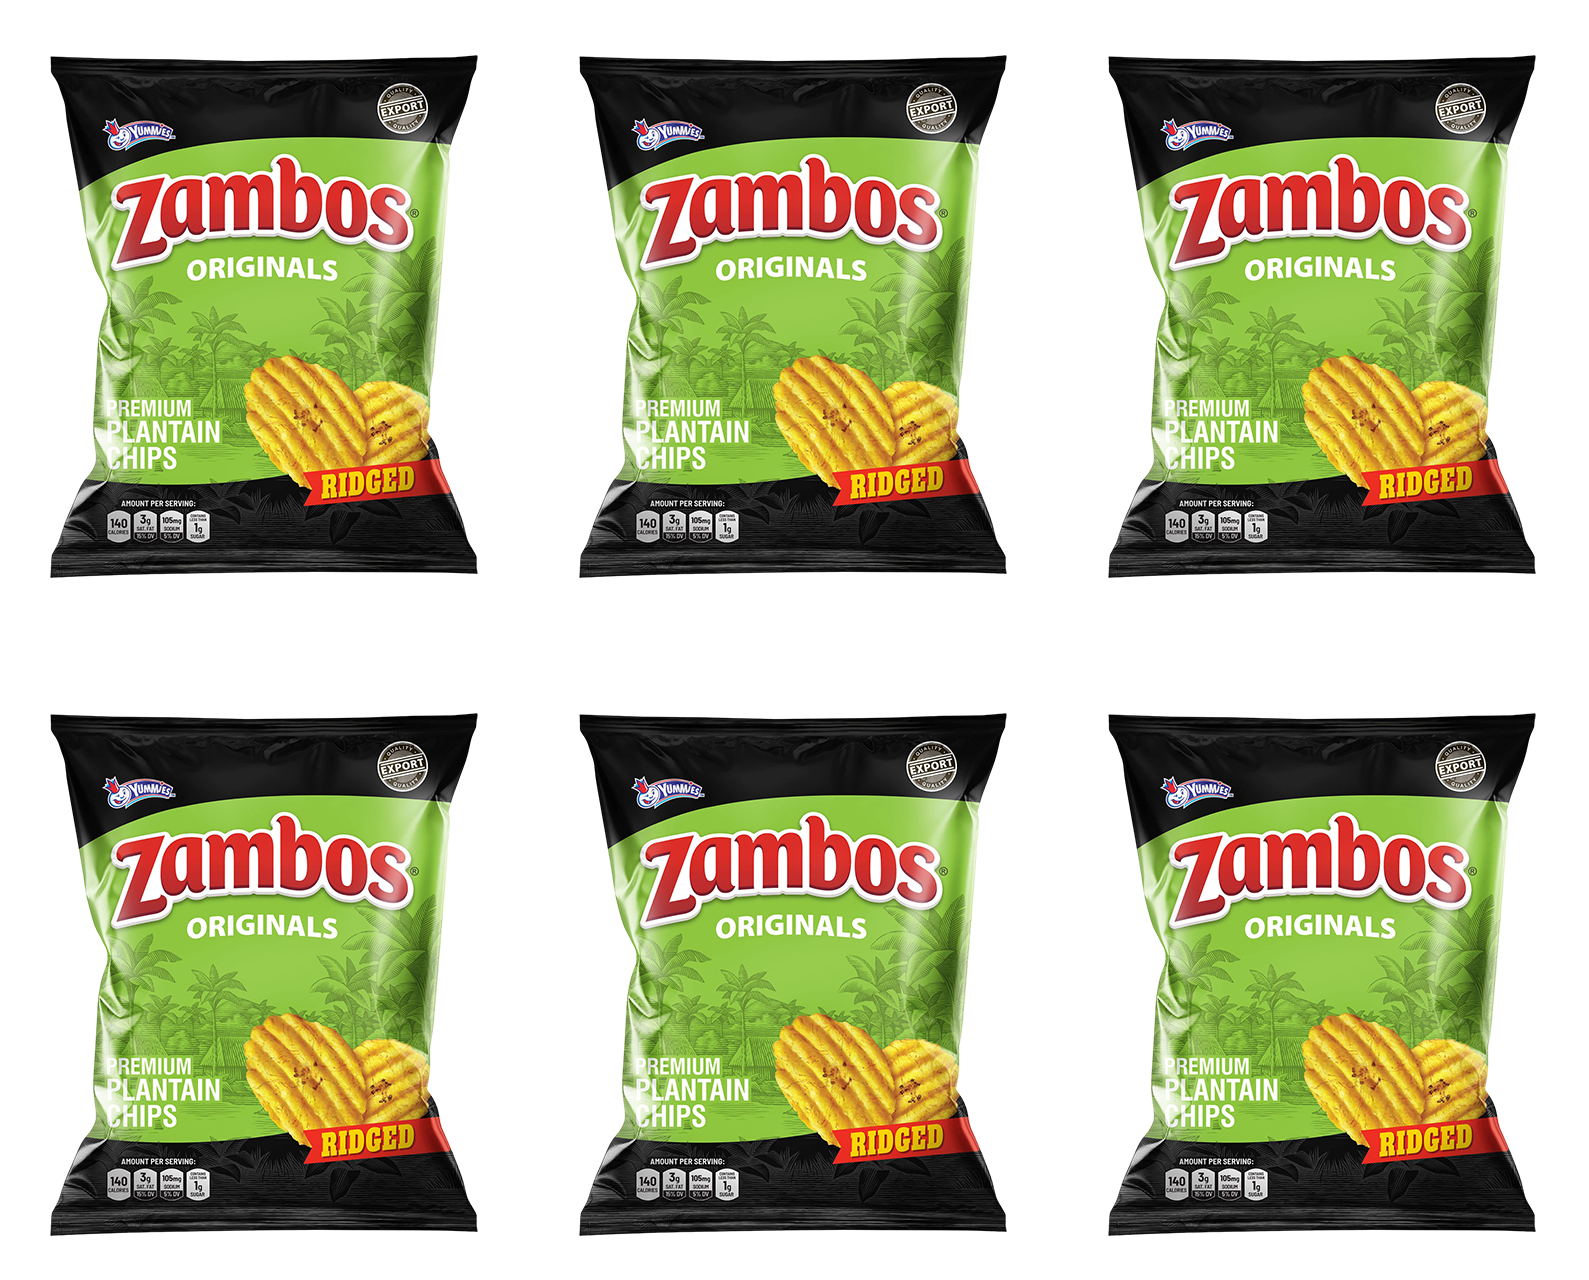 Zambos Plantain Chips – Delicious Plantain Chips originals || Ridged Premium Plantain chips || crunchy and delicious || (5.29 oz. /150g)